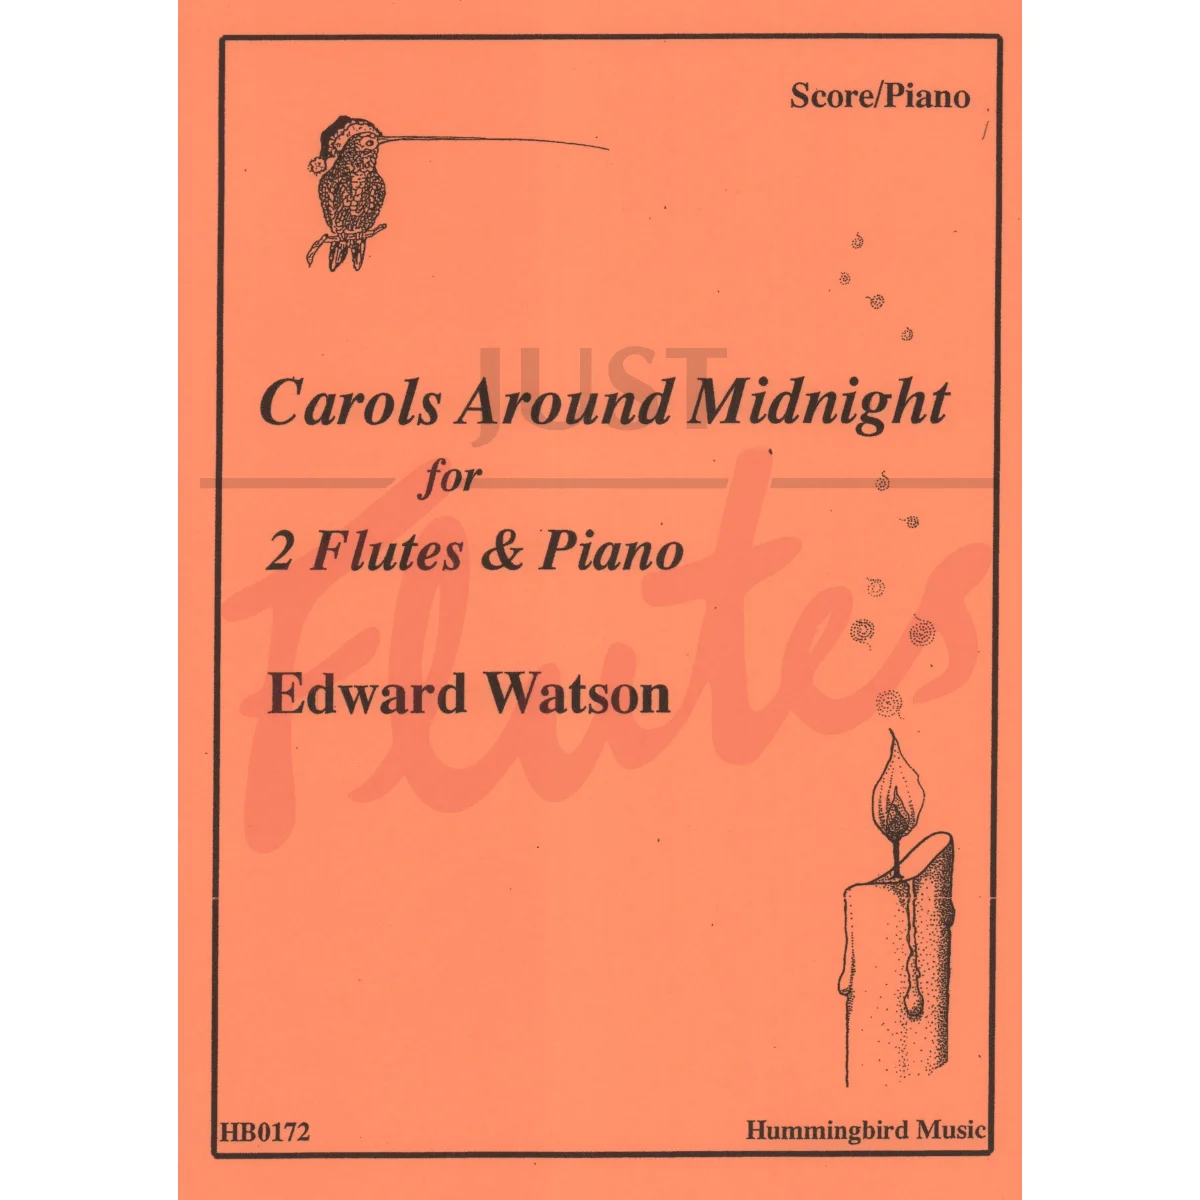 Carols Around Midnight for Two Flutes and Piano